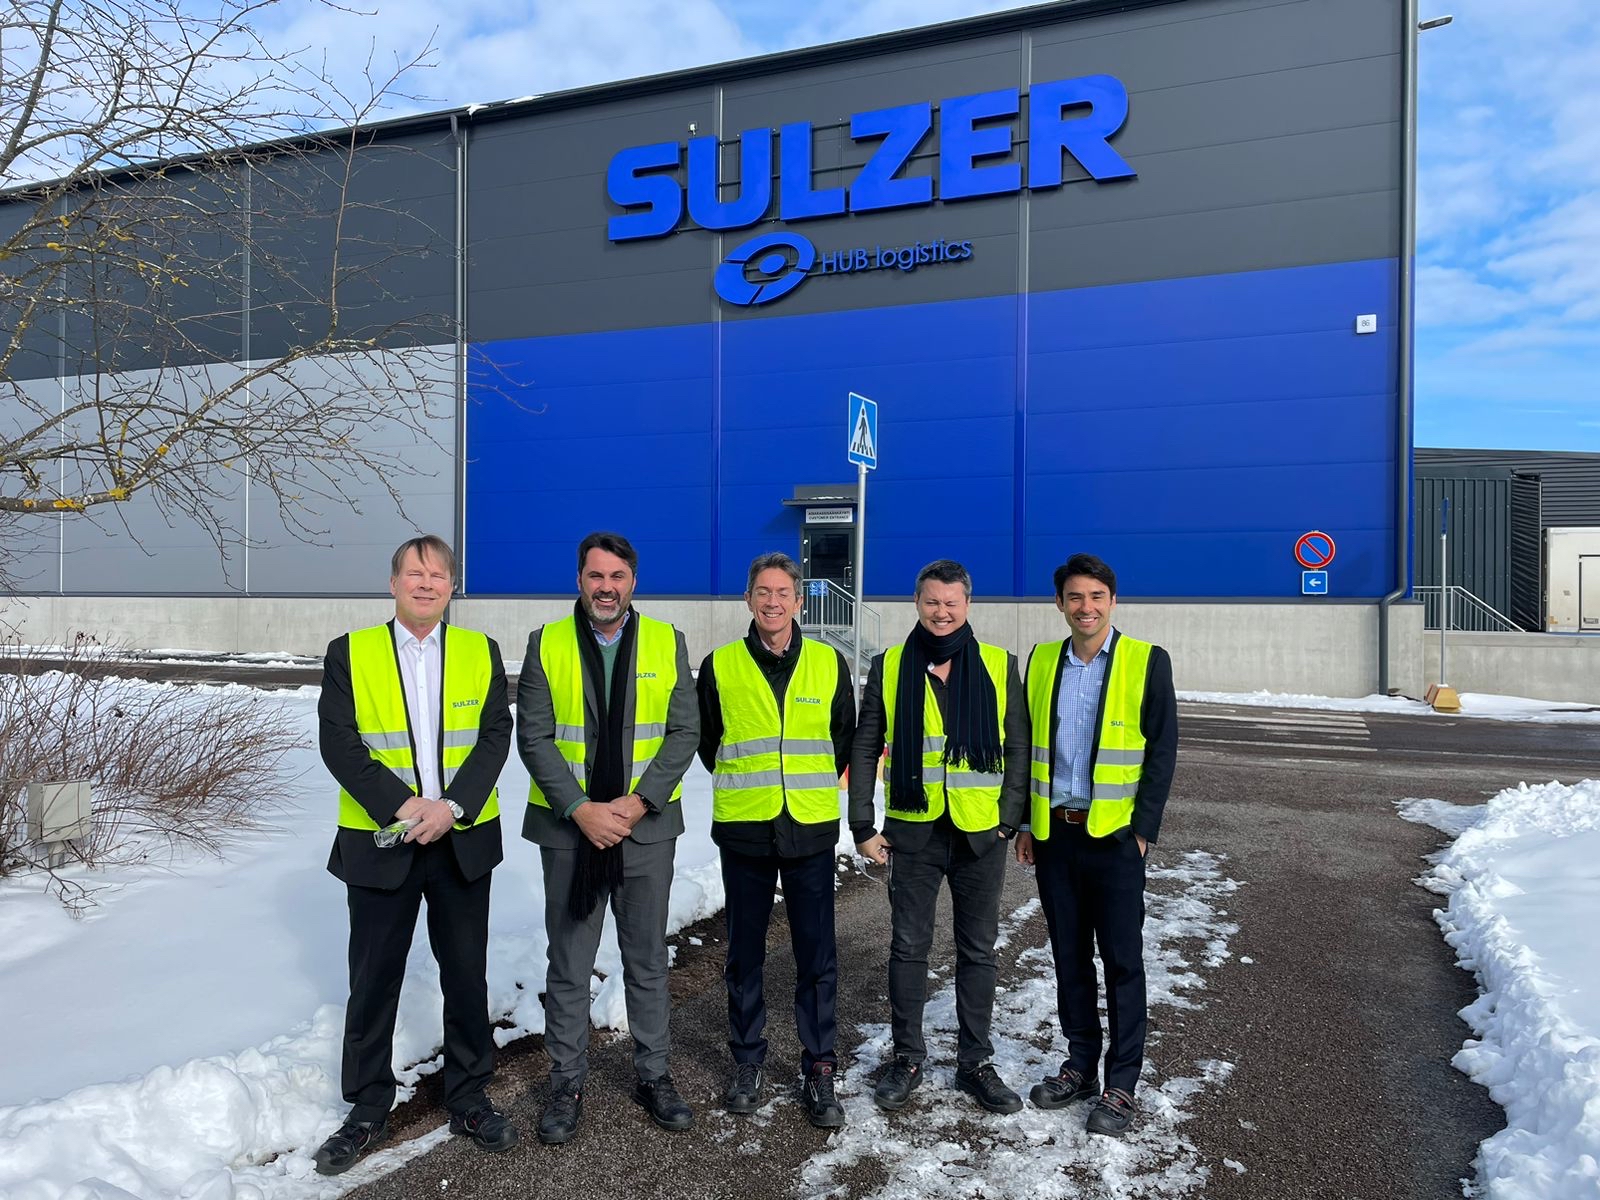 Henrique Nakamura and Marcelo Mancini from Raizen visiting Sulzer factory in Finland with Veli-Pekka Tiittanen, Stefano Sampaolo and Michael Yang.